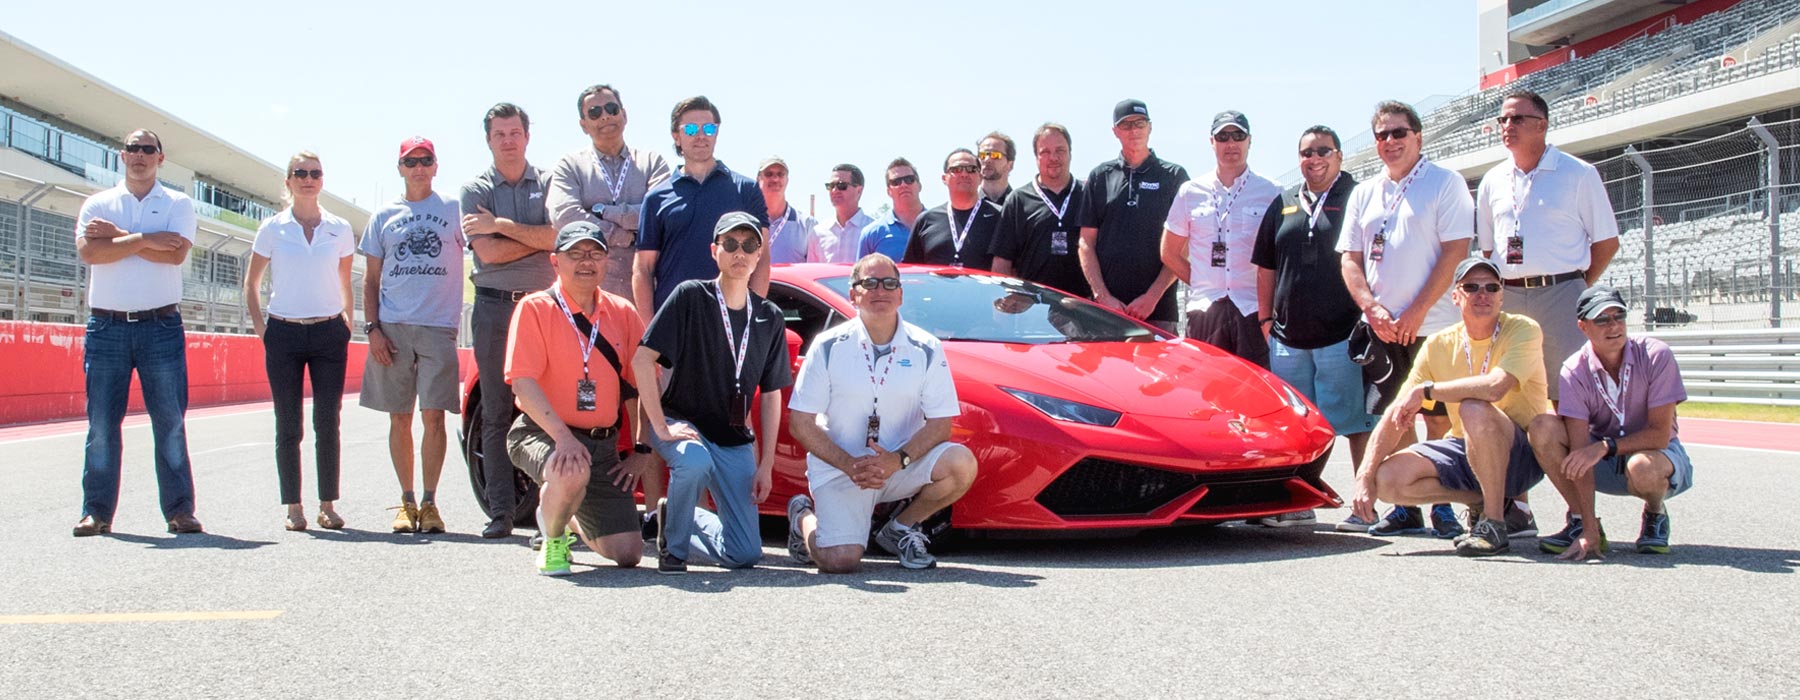 A corporate group event enjying a photo opportunity in front of a Lamborghini at Xtreme Xperience